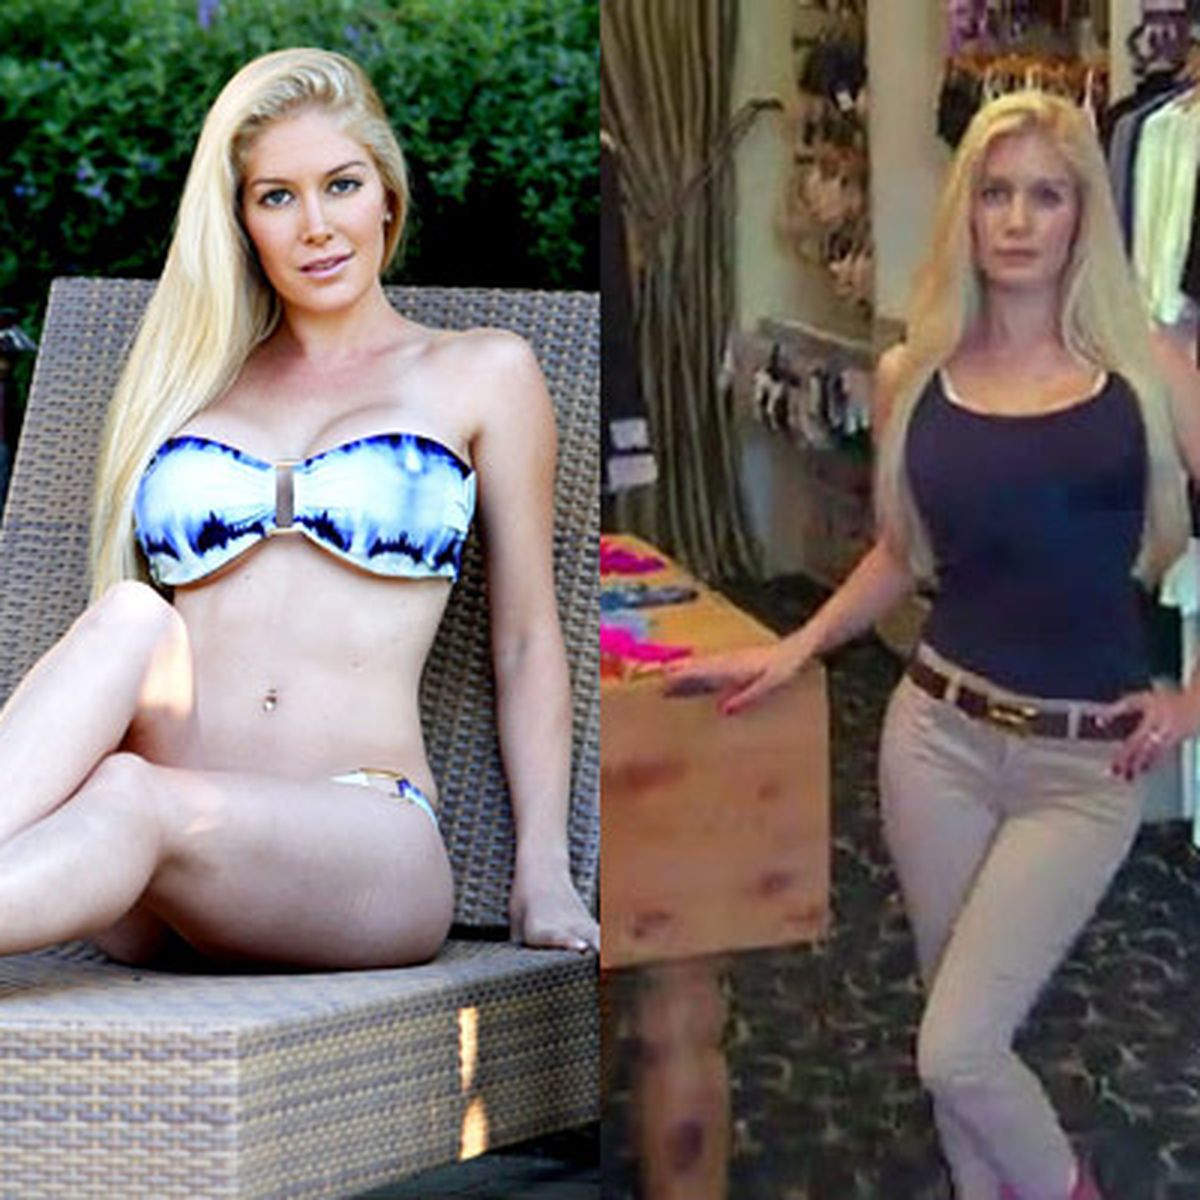 Heidi Montag on why she downsized her F-cup breasts: 'They nearly